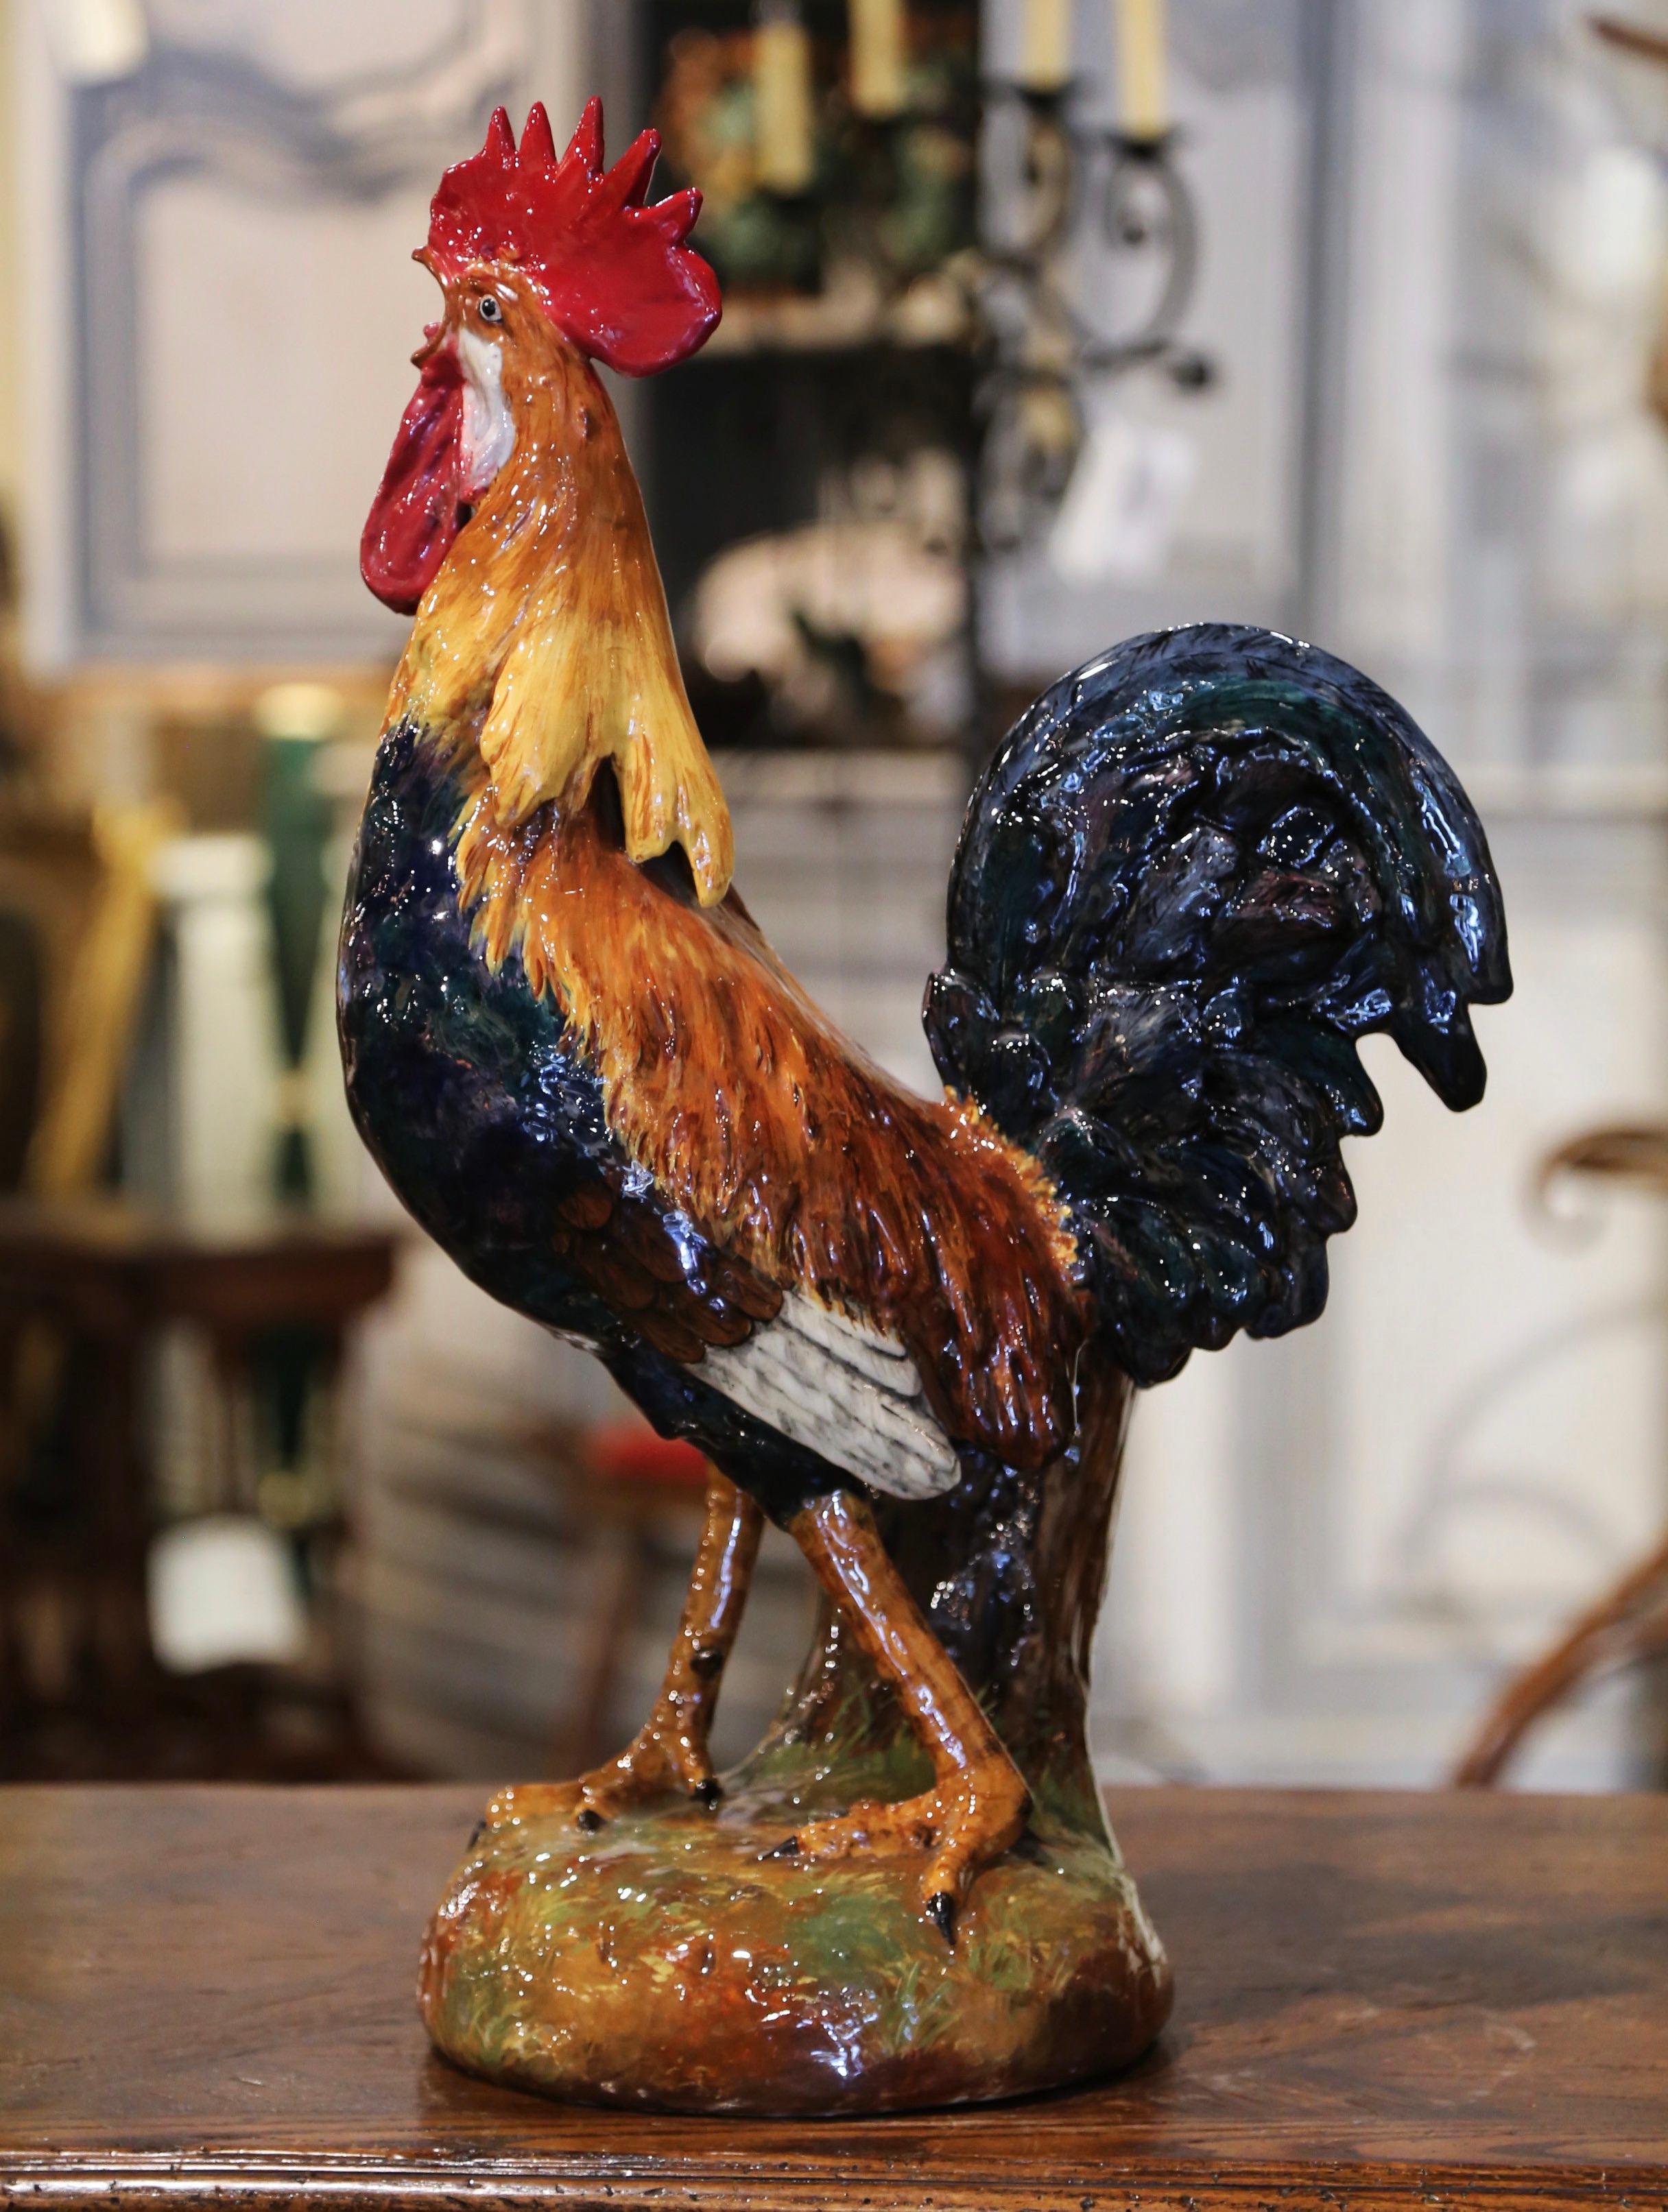 Add the charm of the French countryside to your home with this large, colorful and rare ceramic rooster sculpture. Crafted in France circa 1880 in the style of Paul Comolera or Louis Carrier Belleuse, the Majolica composition is at once a flower